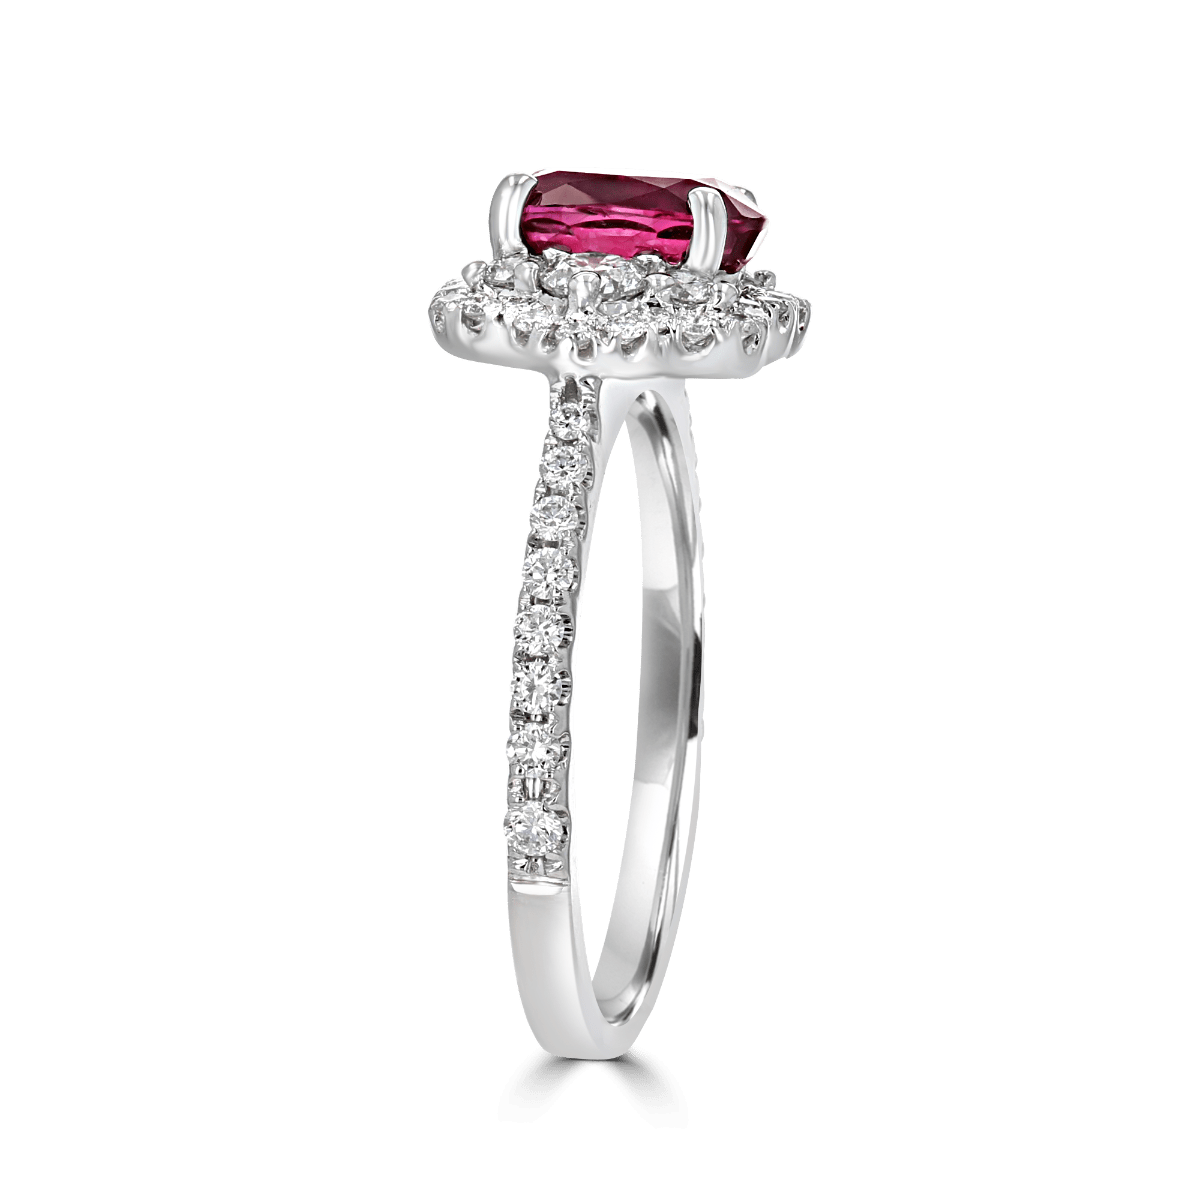 Juleve 18KT 1.60 CT Ruby & .62 CTW Diamond Scallop Cluster Halo Ring 4,4.5,5,5.5,6,6.5,7,7.5,8,8.5,9